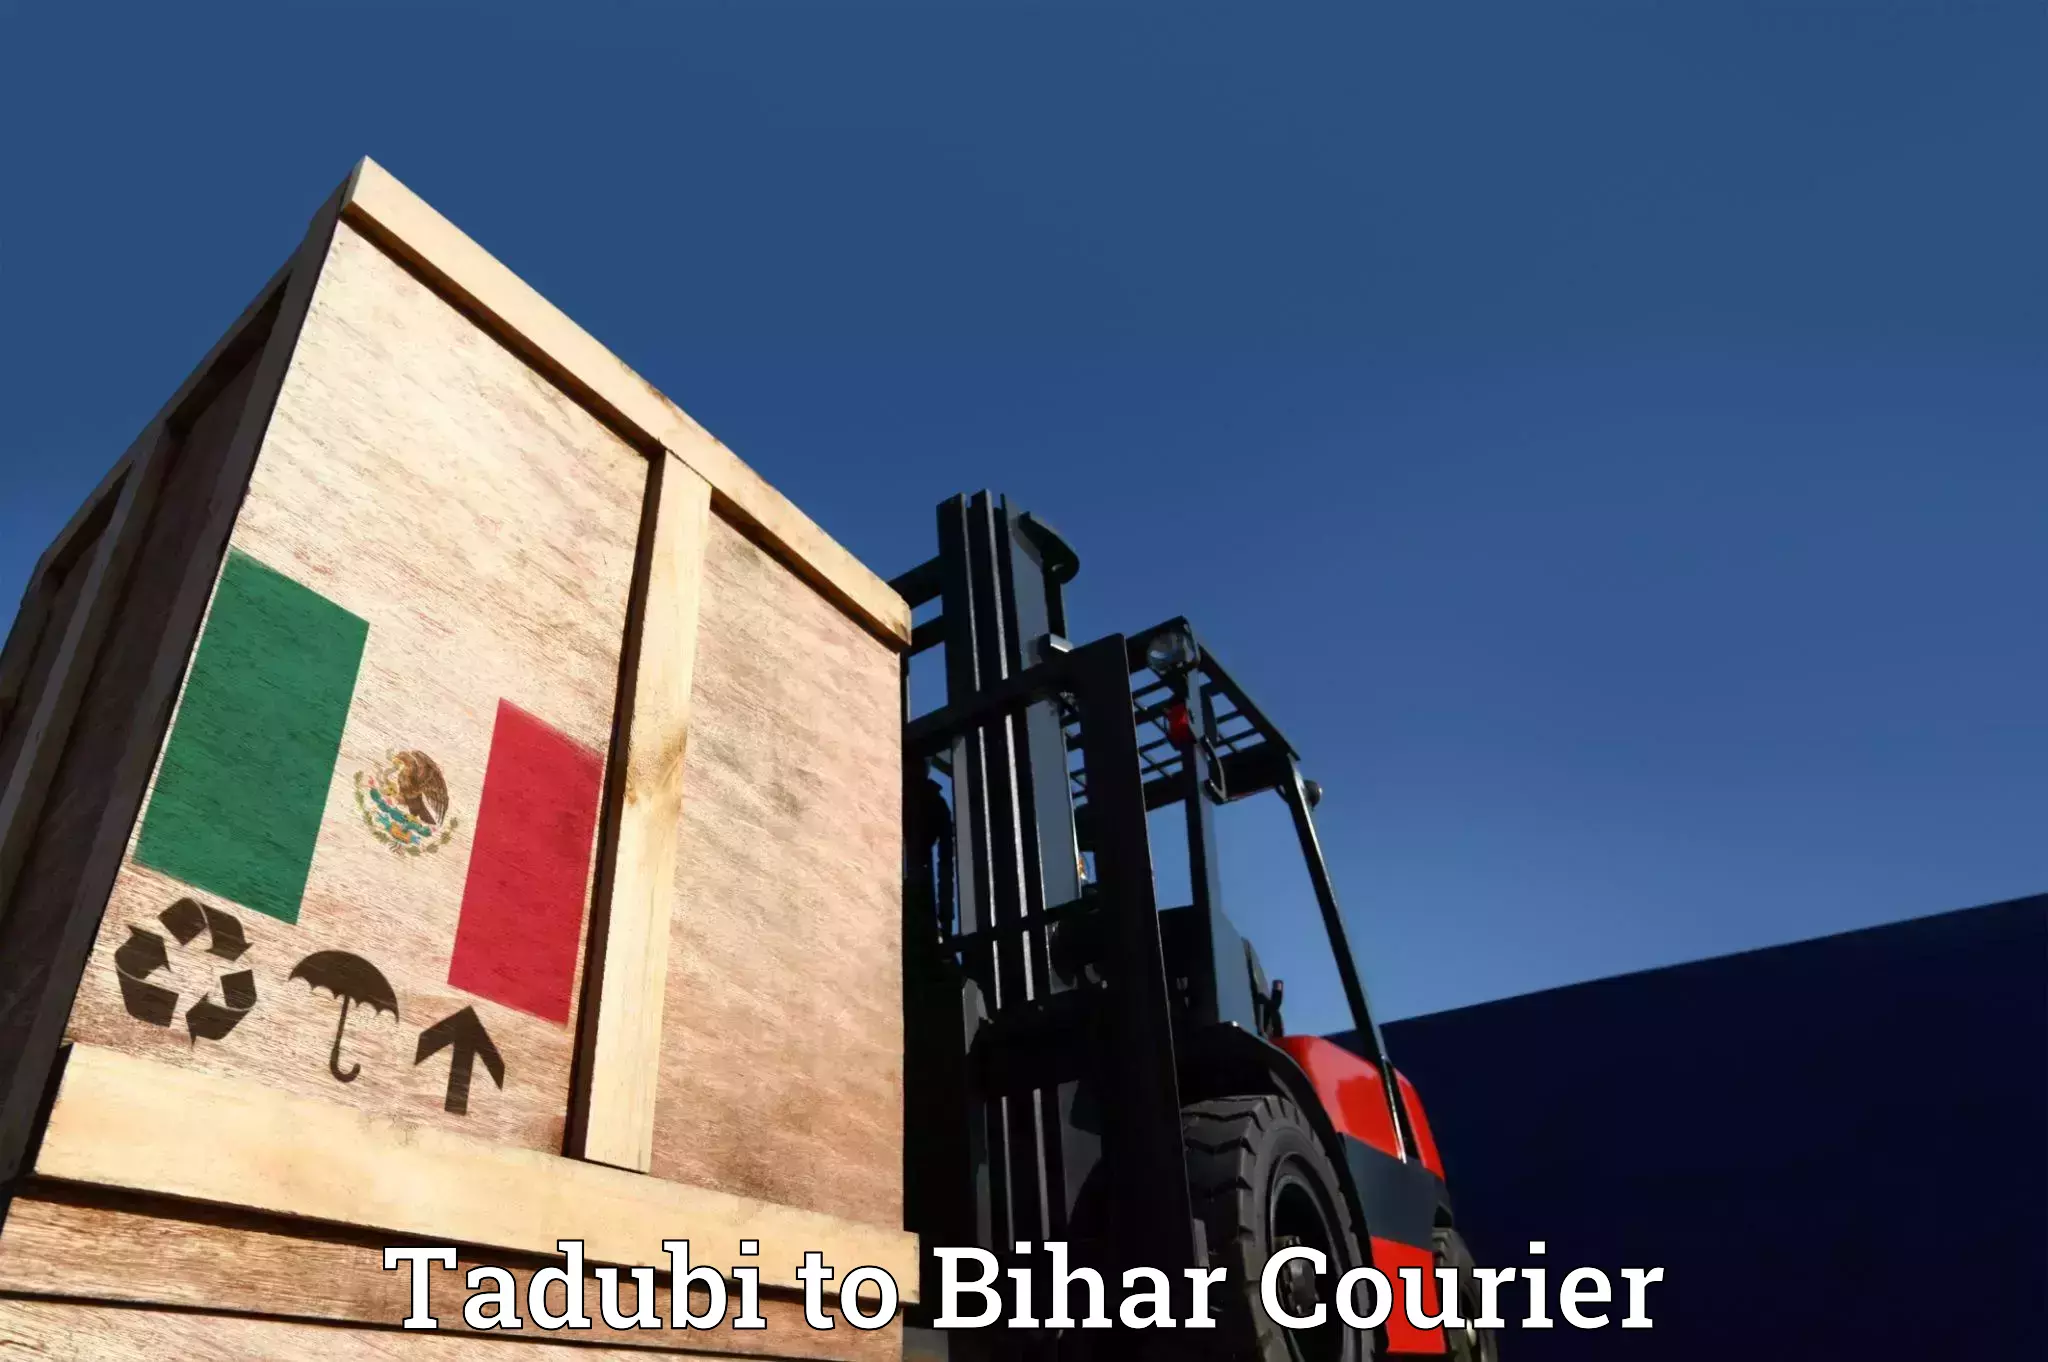 Furniture moving specialists Tadubi to Patna